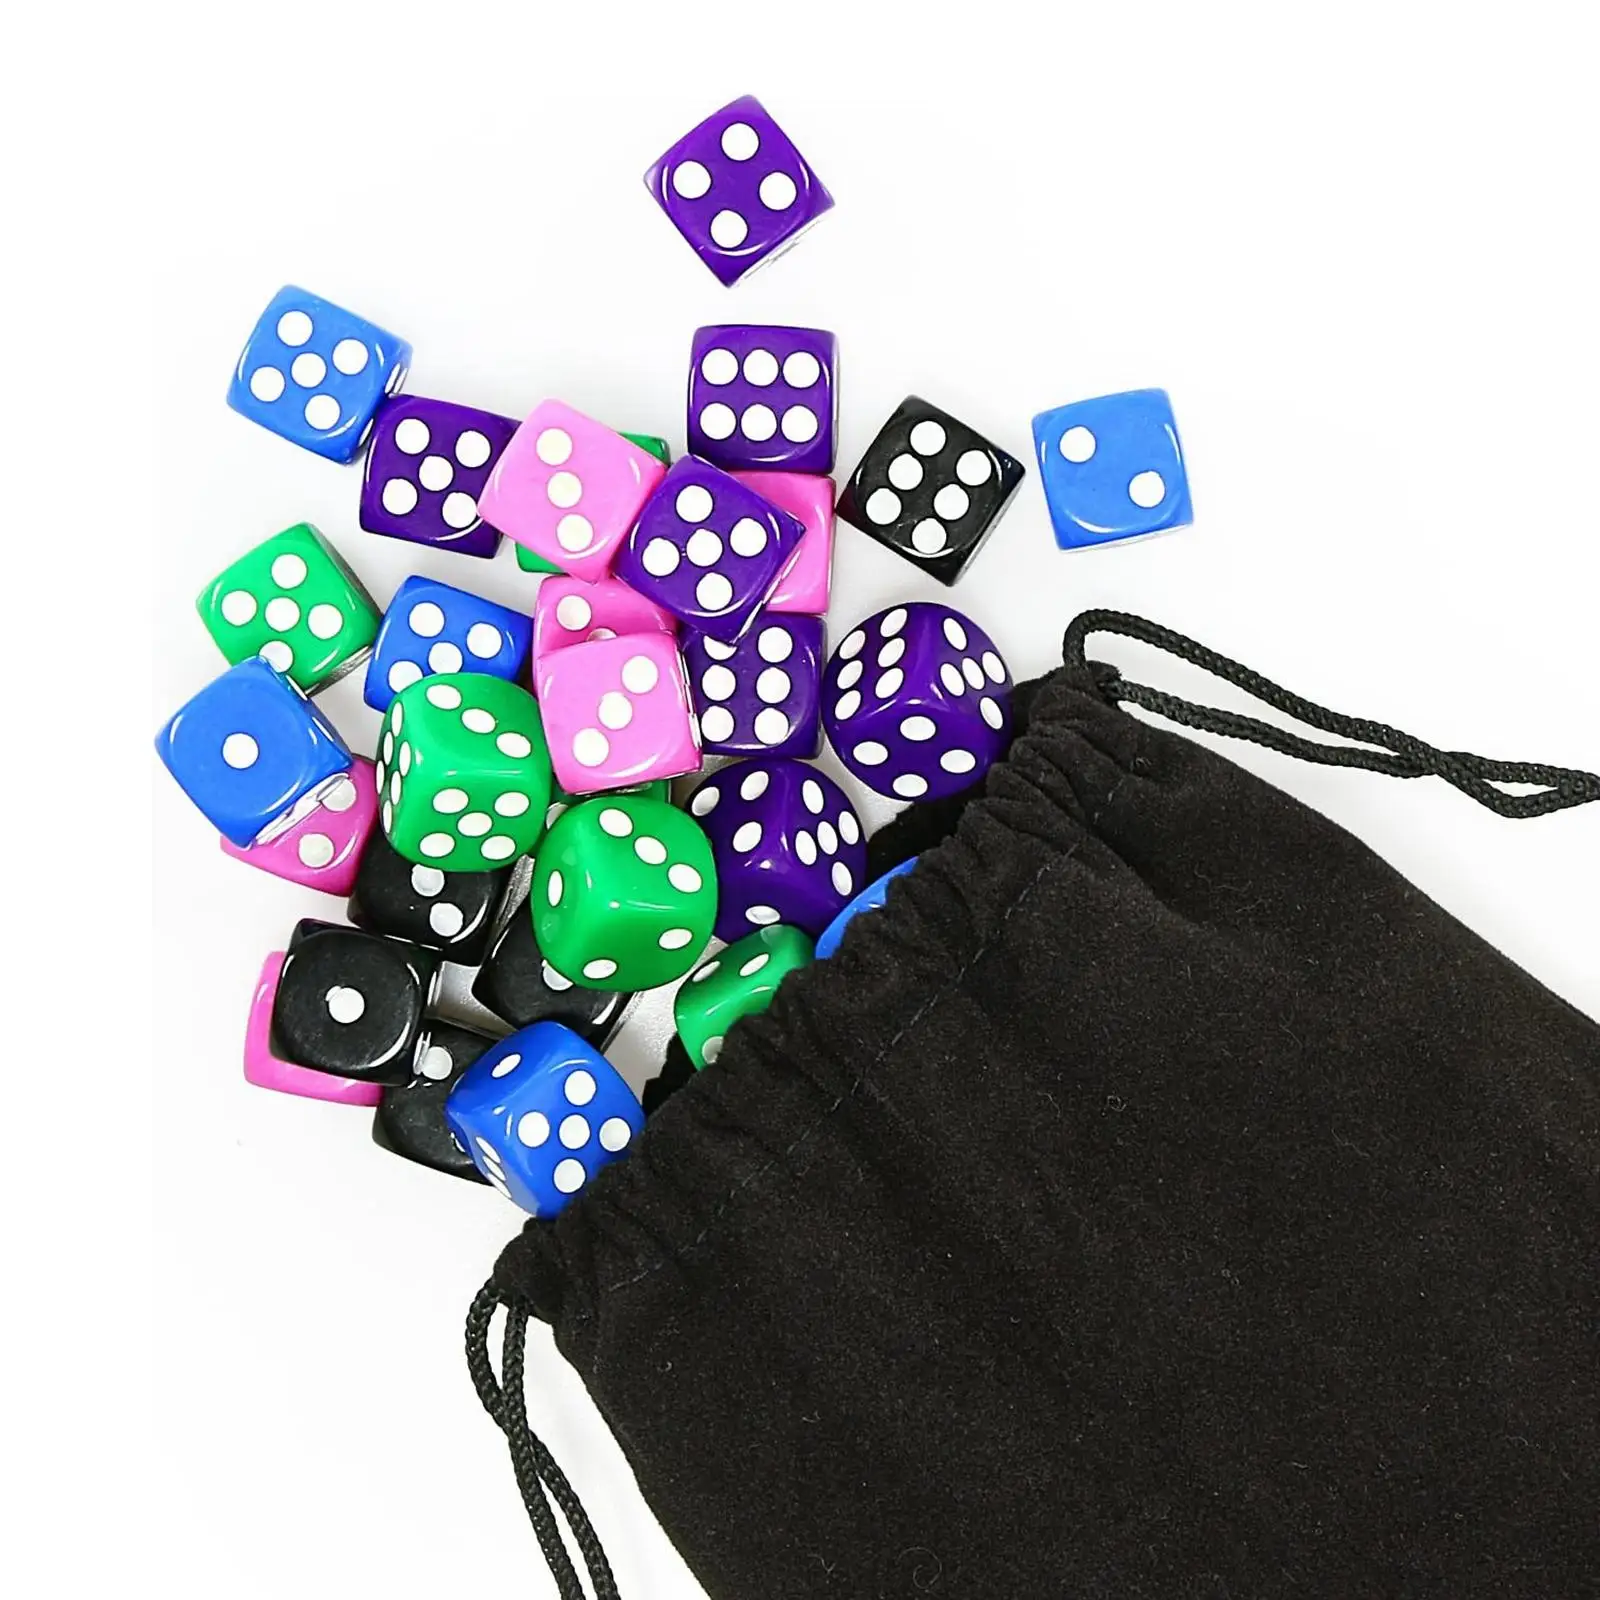 50Pcs D6 Six Sided Dices Set with Drawstring Dice Bag for MTG RPG Party Toys 16mm Acrylic Dice Board Game Role Playing Games